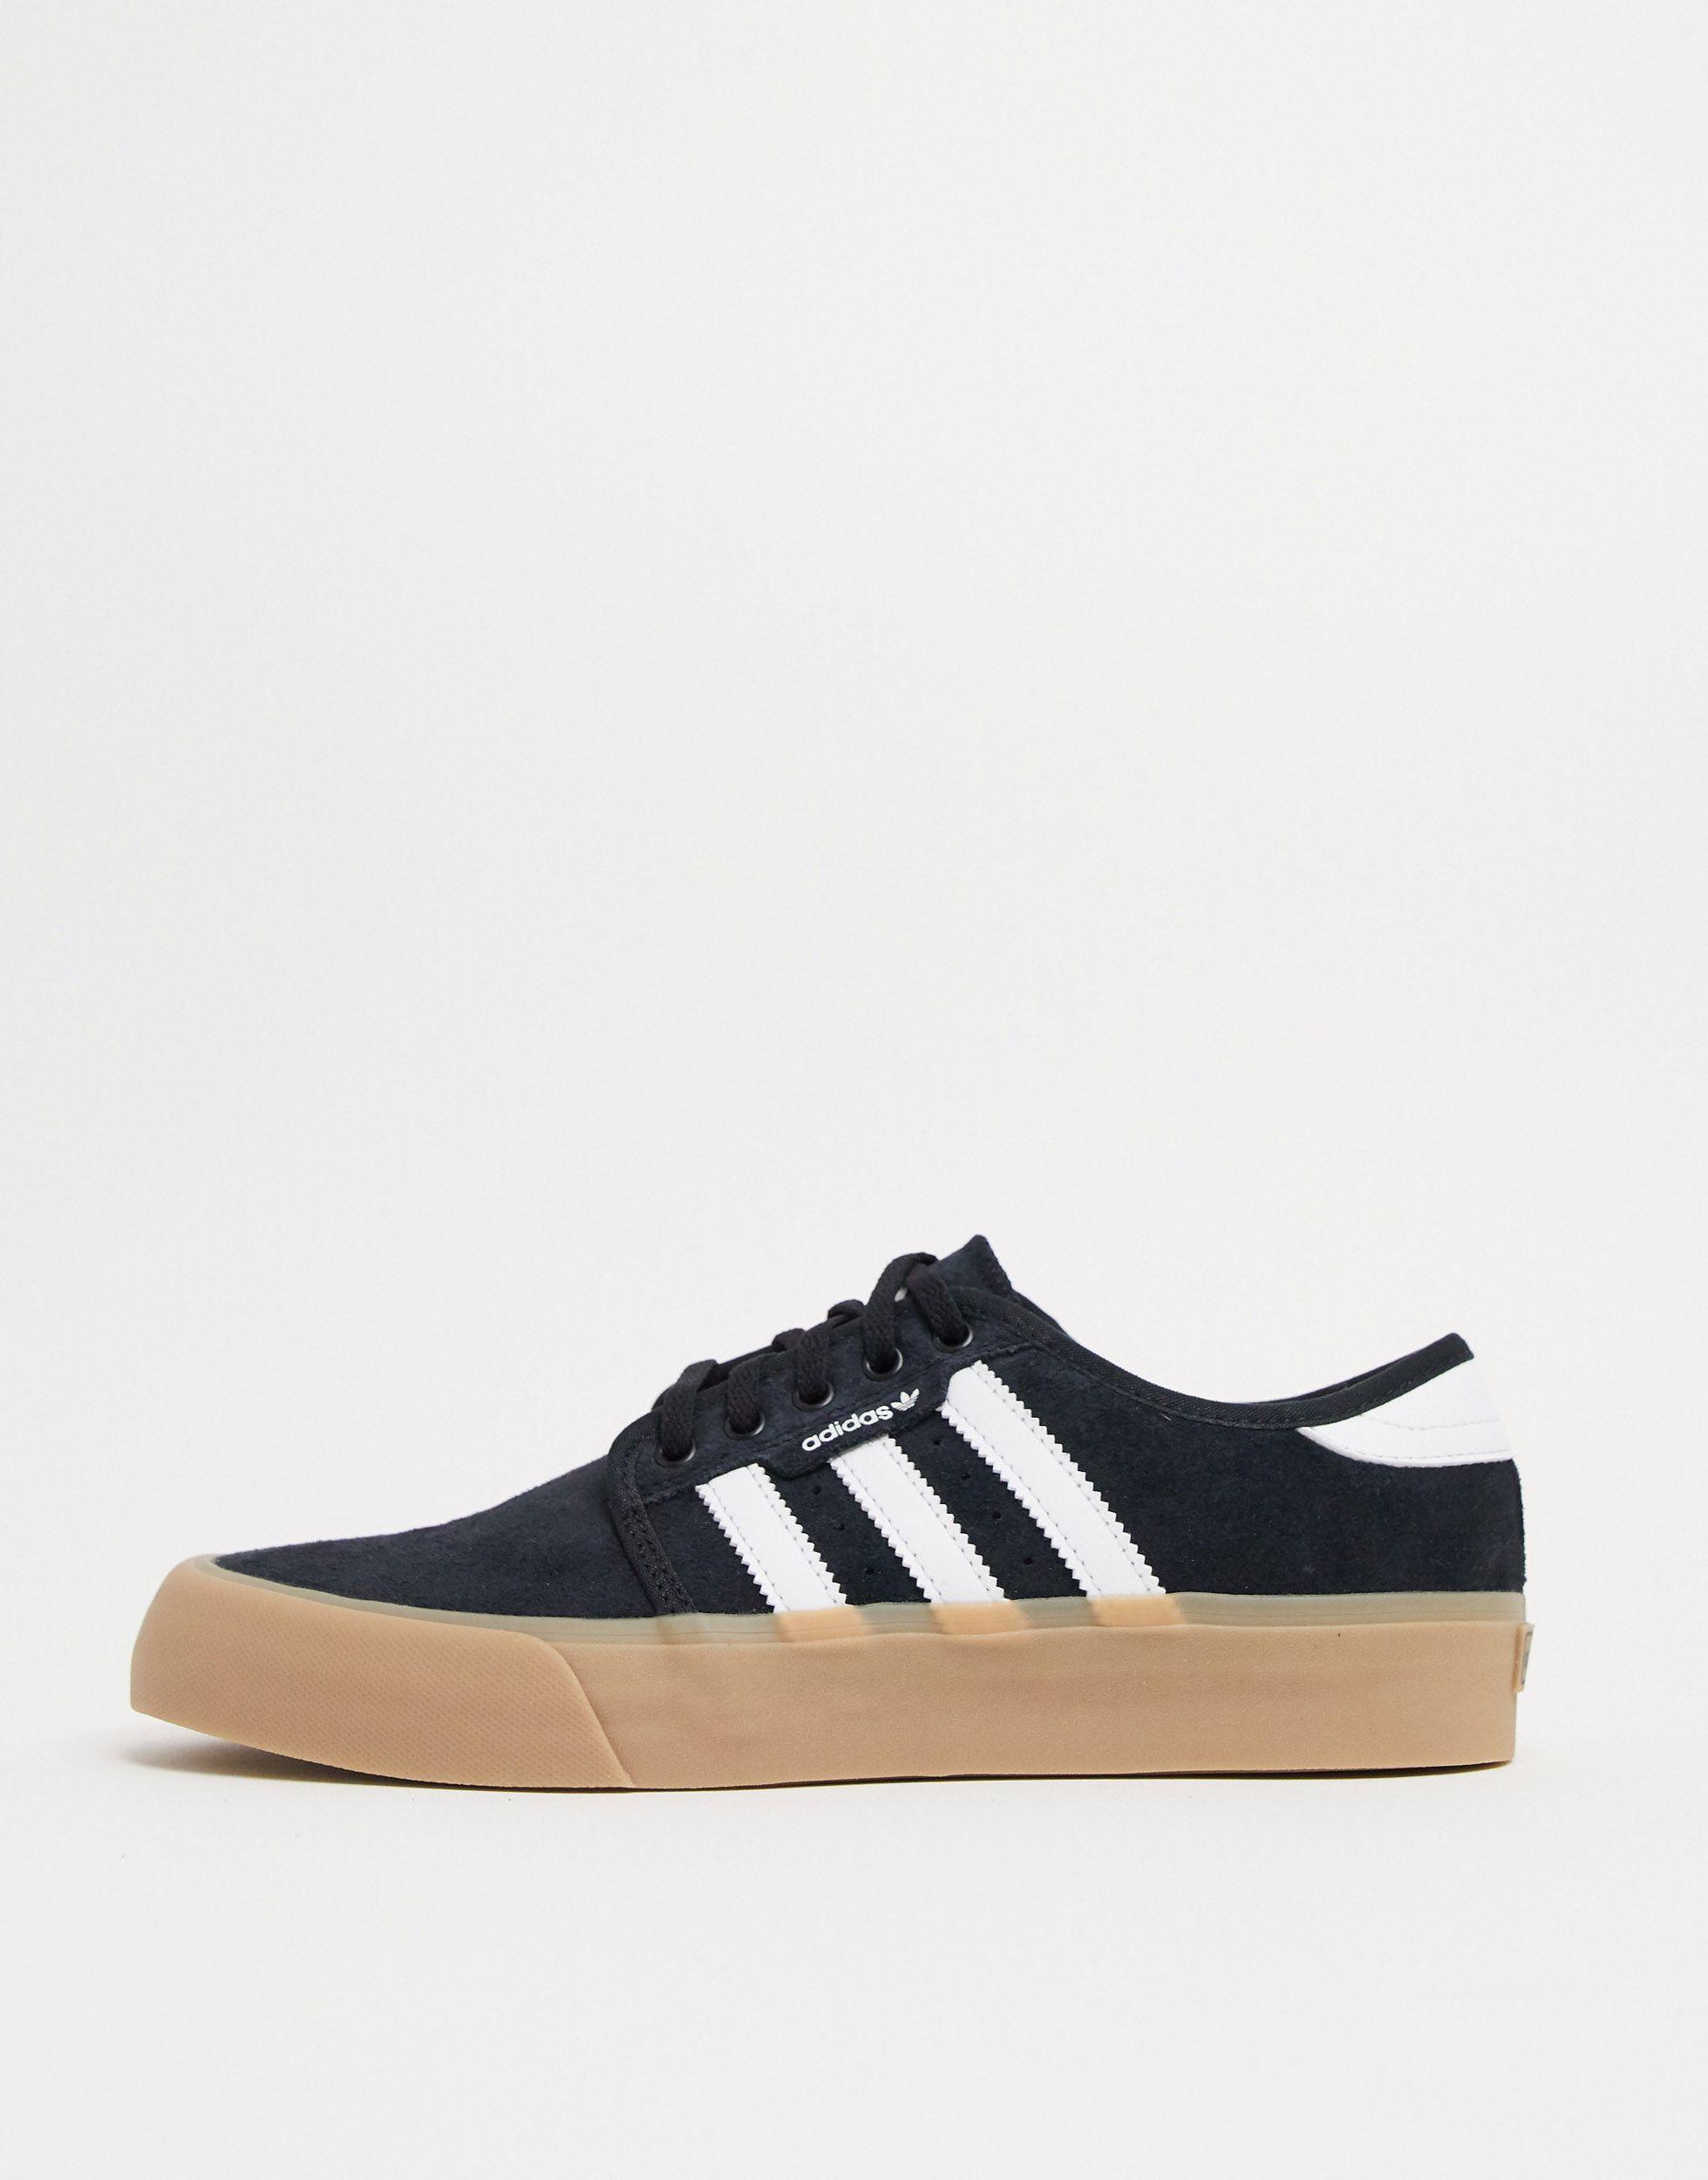 adidas Originals Leather Seeley Xt in Black for Men - Save 65% | Lyst